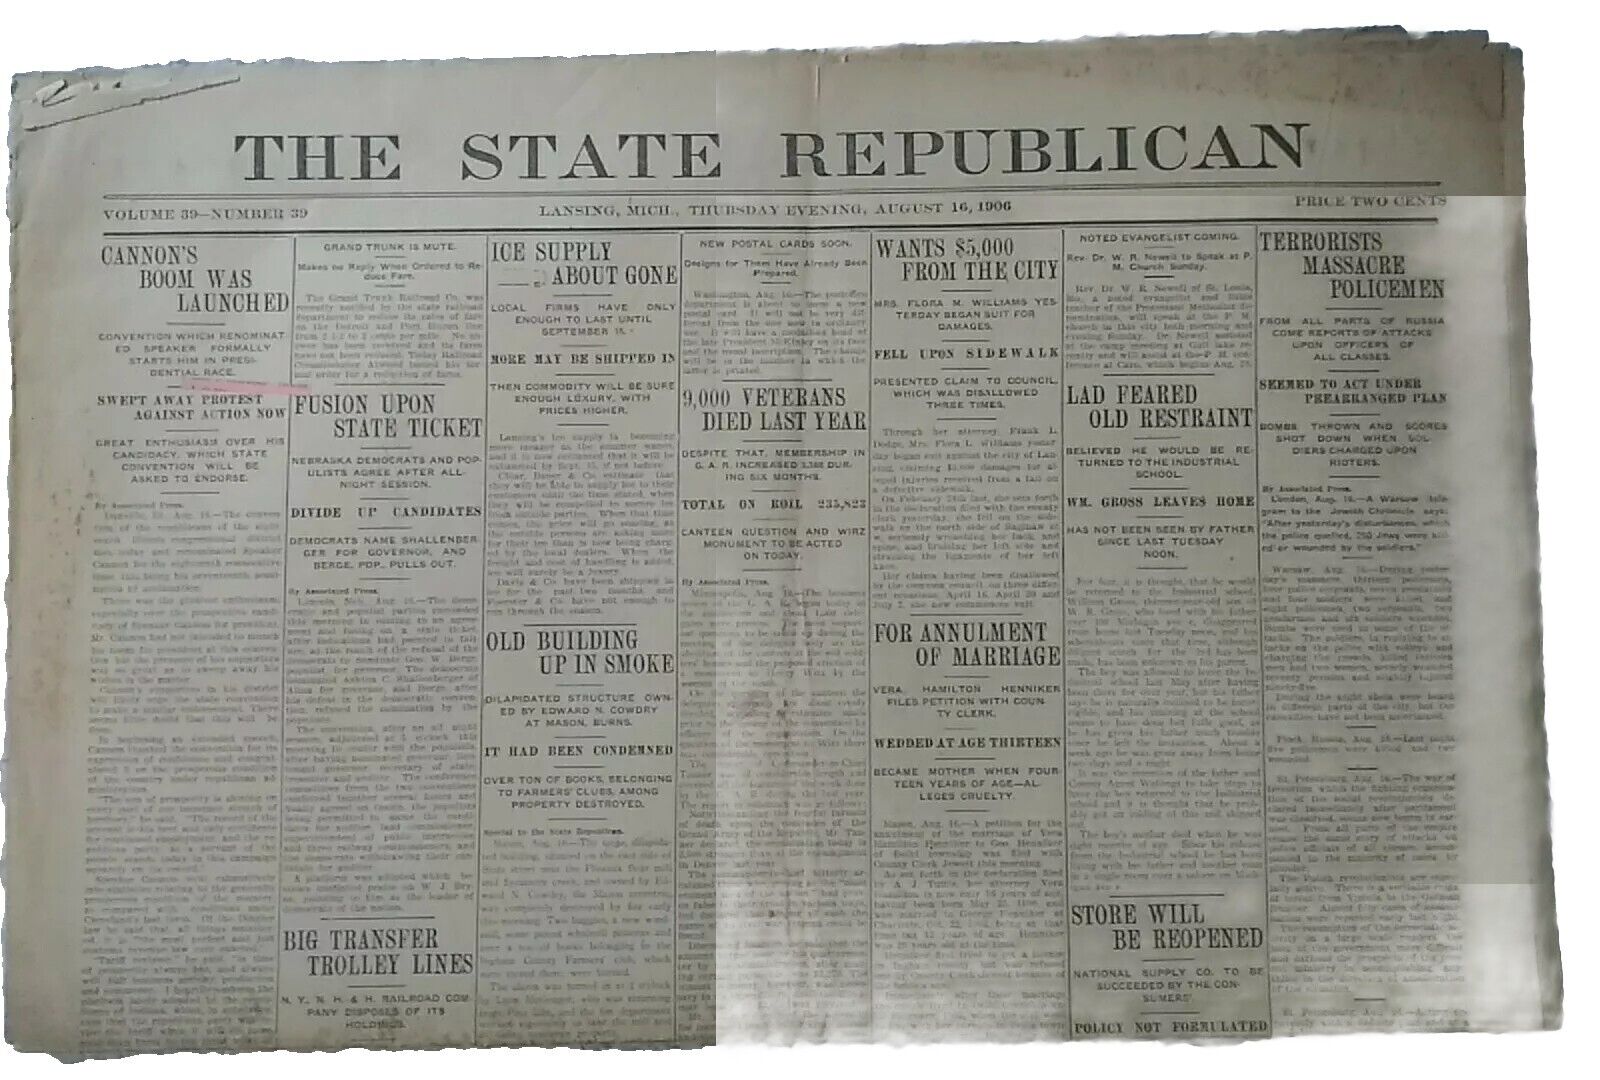 Lansing MICHIGAN The State Republican August 16 1906 Newspaper 8 Pgs.